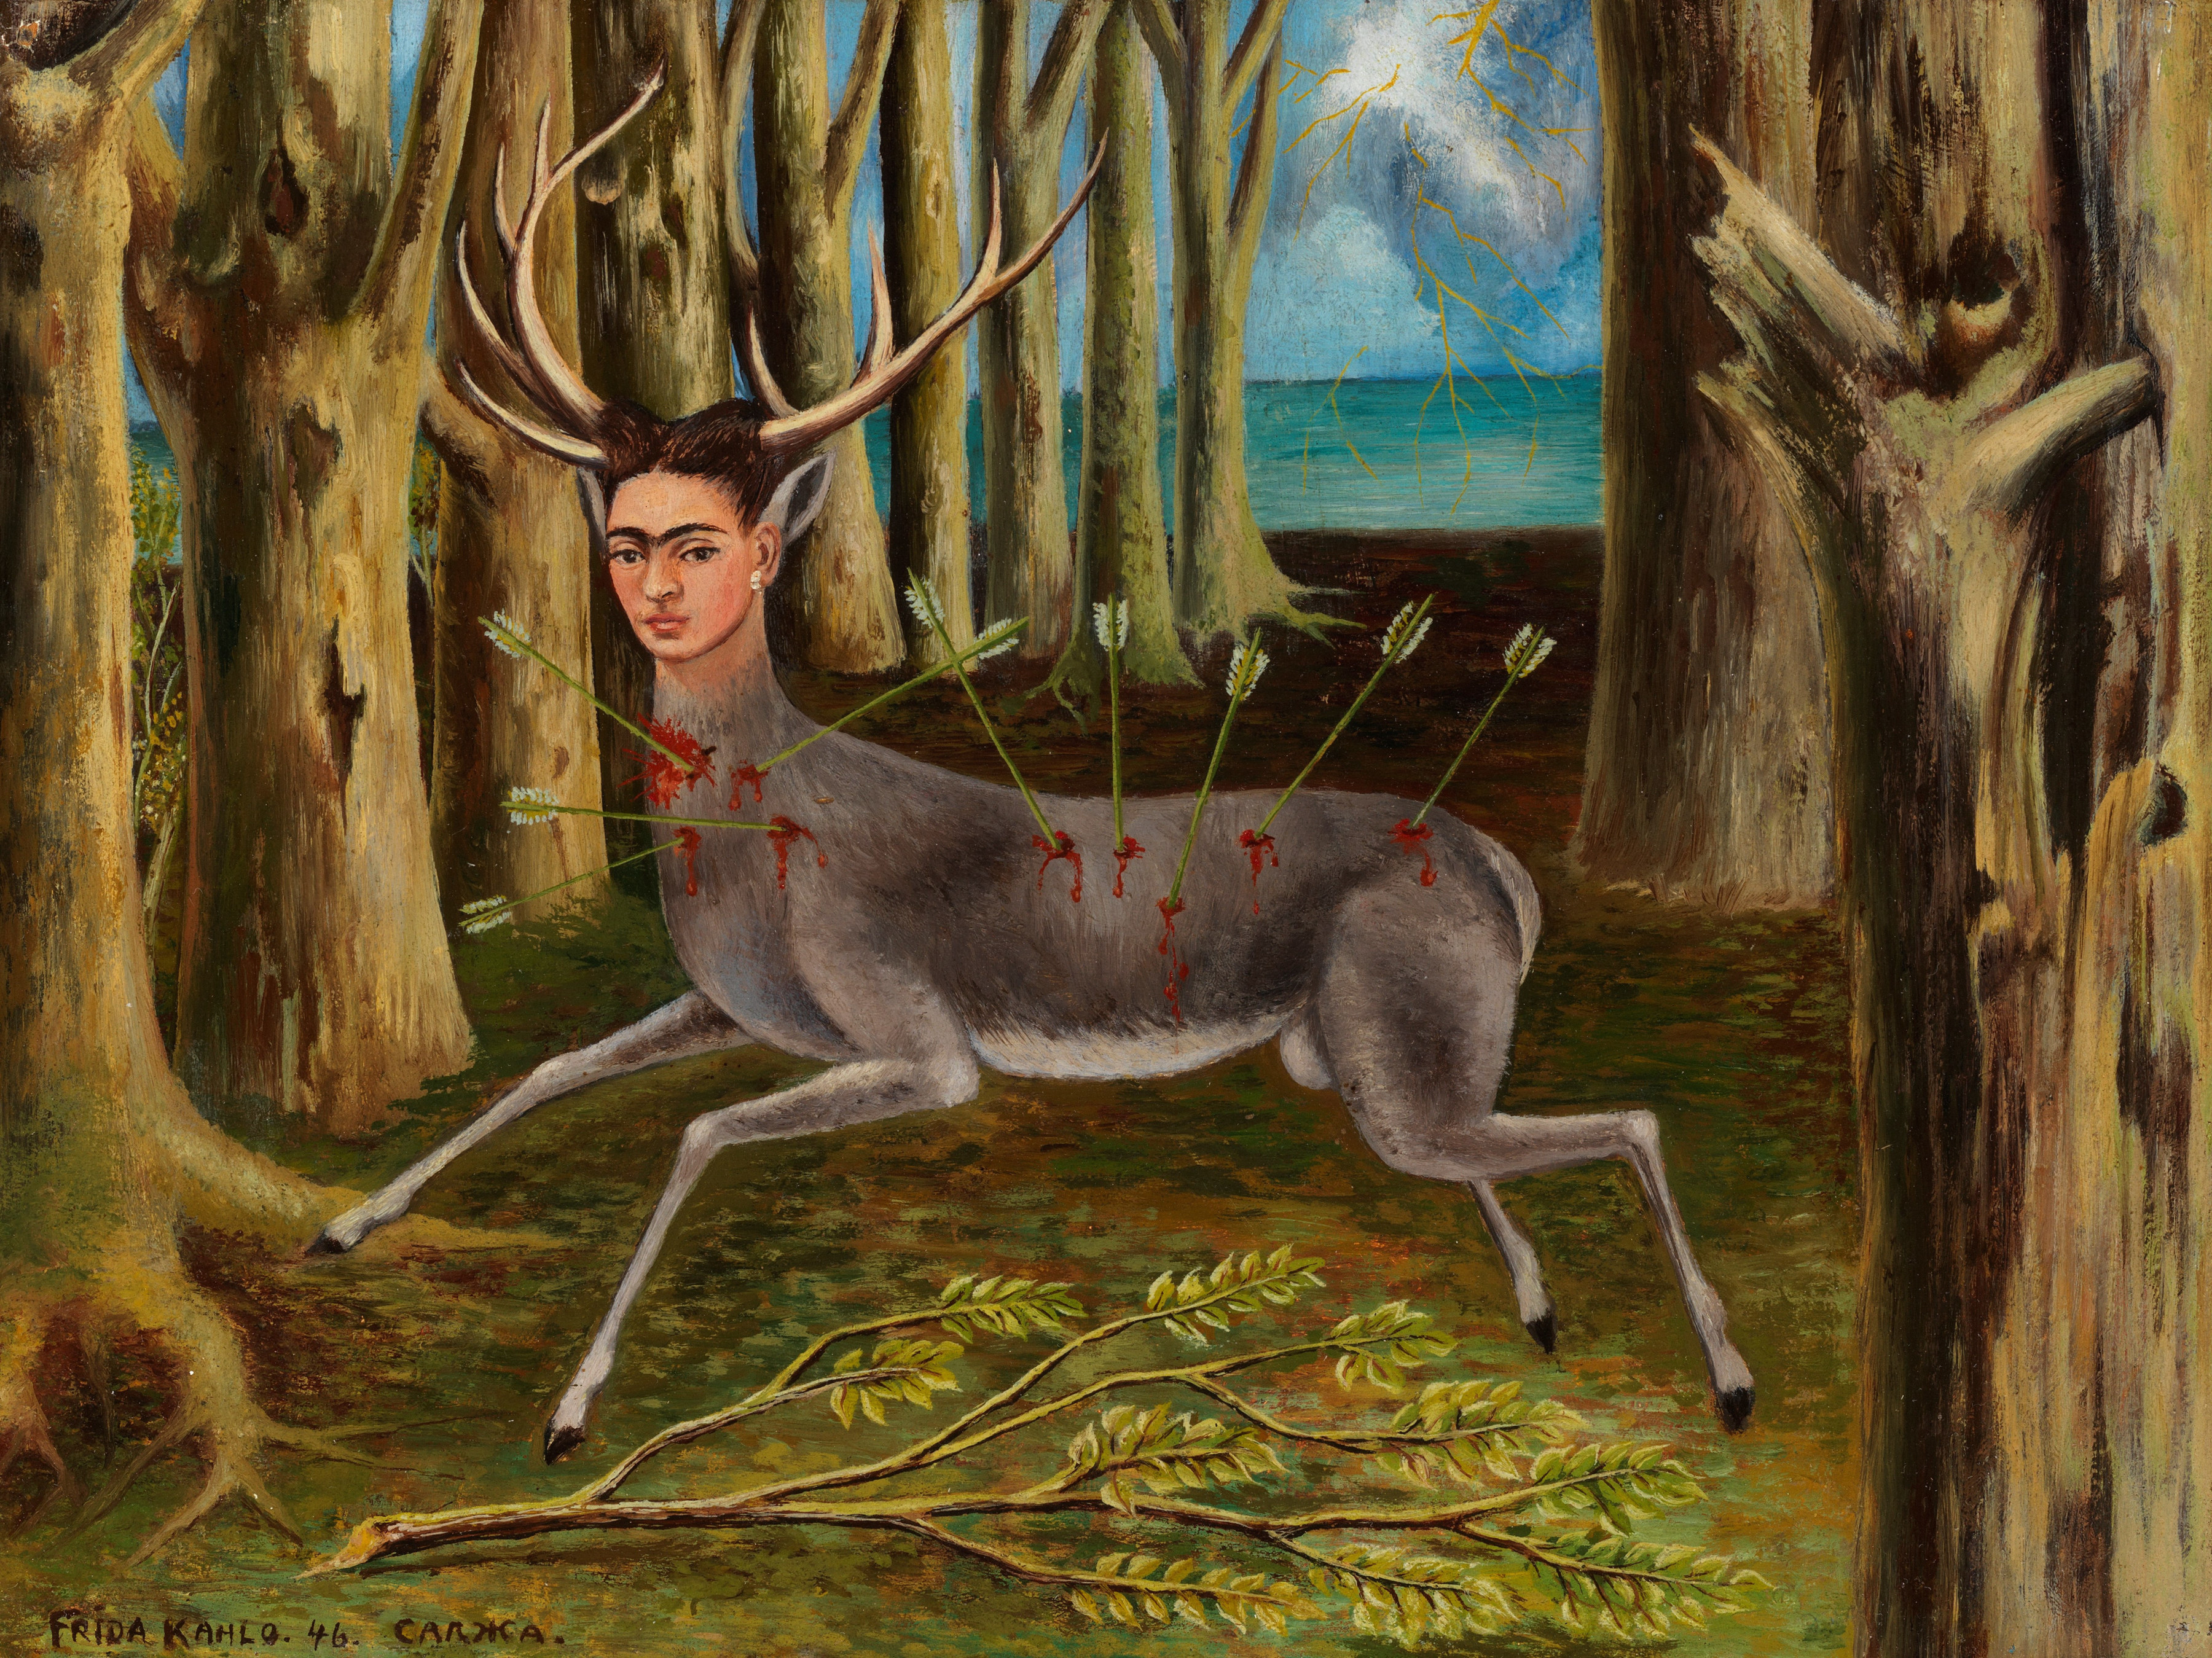 Frida Kahlo. La Venadita (The Little Deer). 1946. Oil on Masonite, 22.5 by 29.8 cm (8⅞ by 11&frac34; in.). Private Collection &copy; 2019 Banco de M&eacute;xico Diego Rivera Frida Kahlo Museums Trust, Mexico, D.F. / Artists Rights Society (ARS), New York